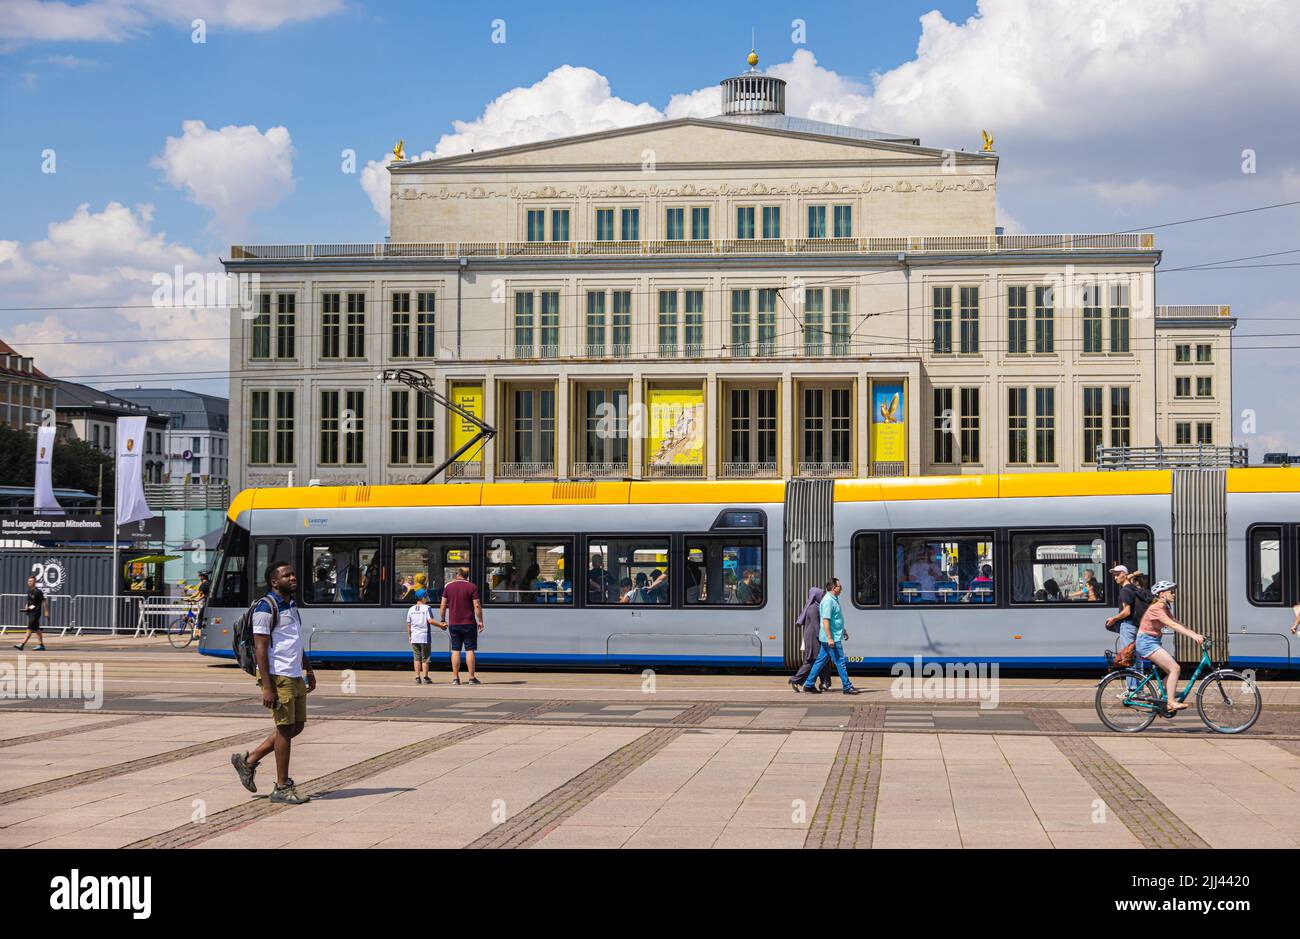 Leipzig, Germany - June 25, 2022: The opera house on the augustusplatz (Augustus Square). A modern Leipziger Tram on the Tram Stop in front of the ope Stock Photo